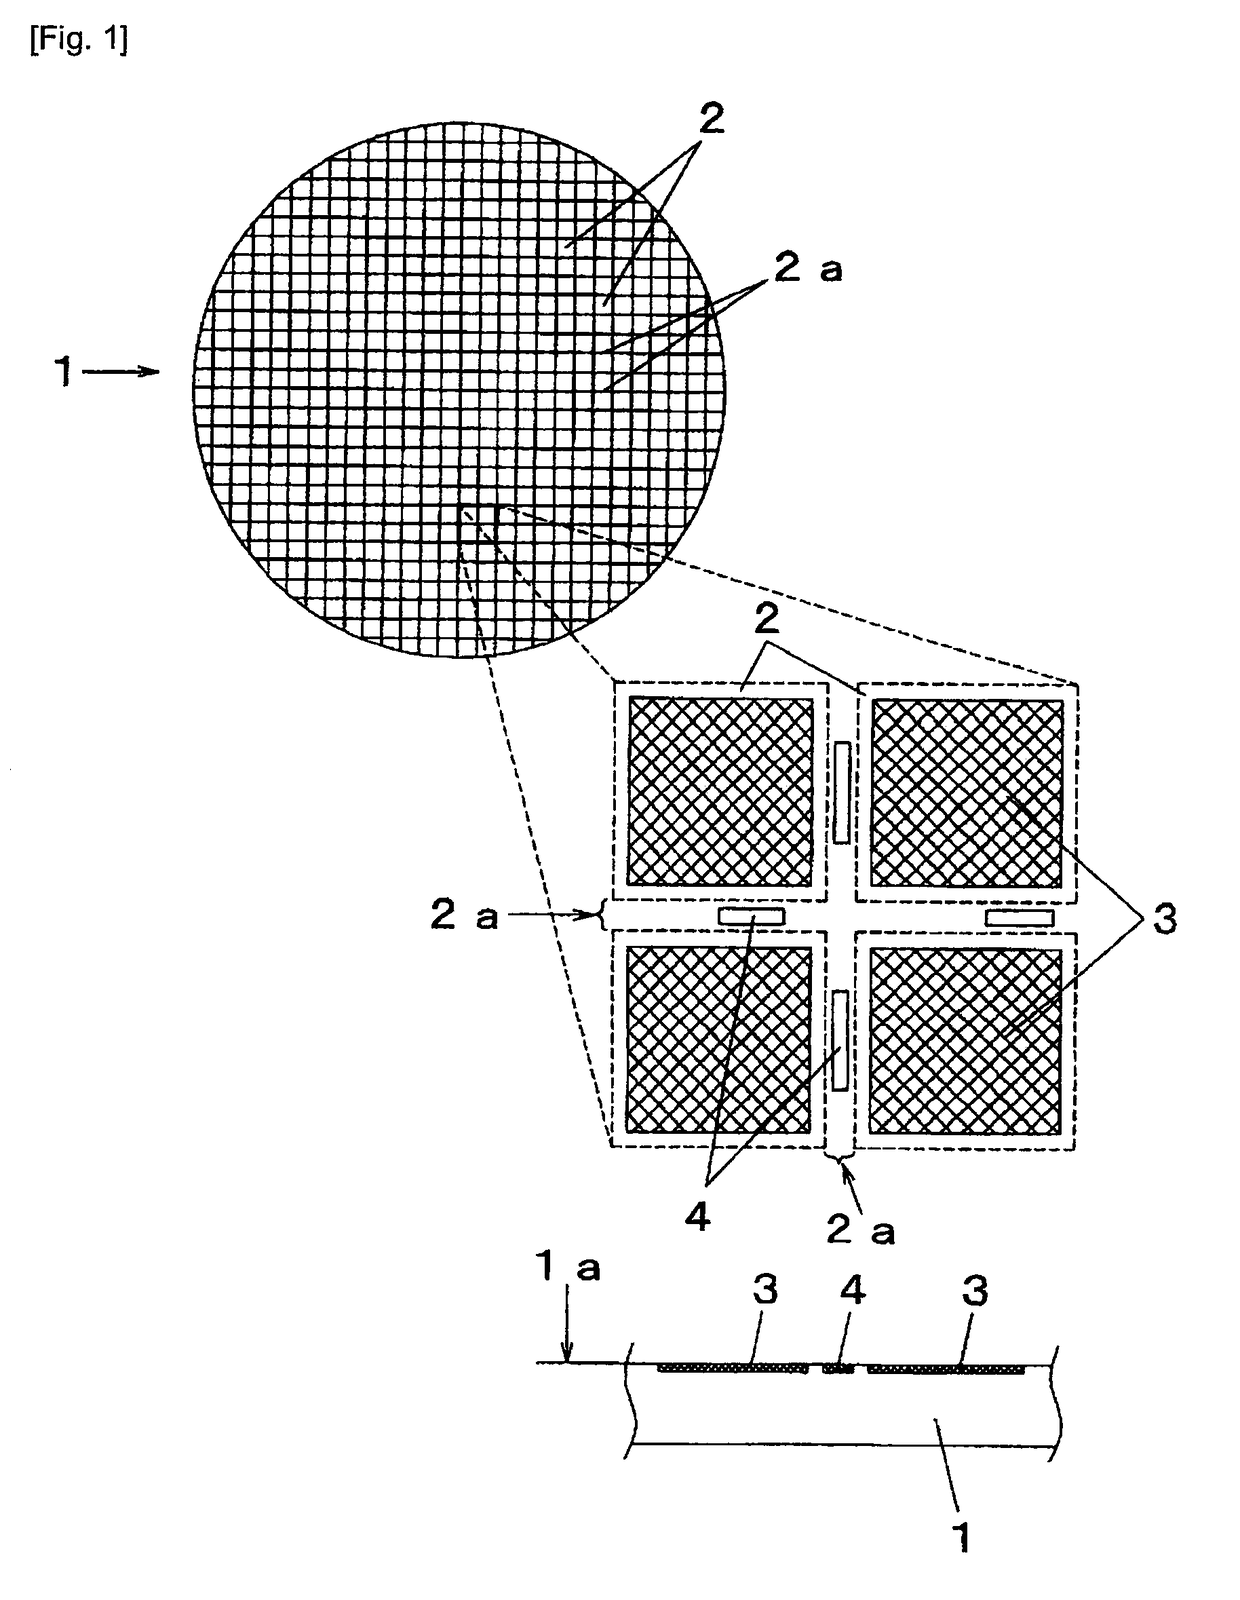 Method of manufacturing semiconductor chip using laser light and plasma dicing